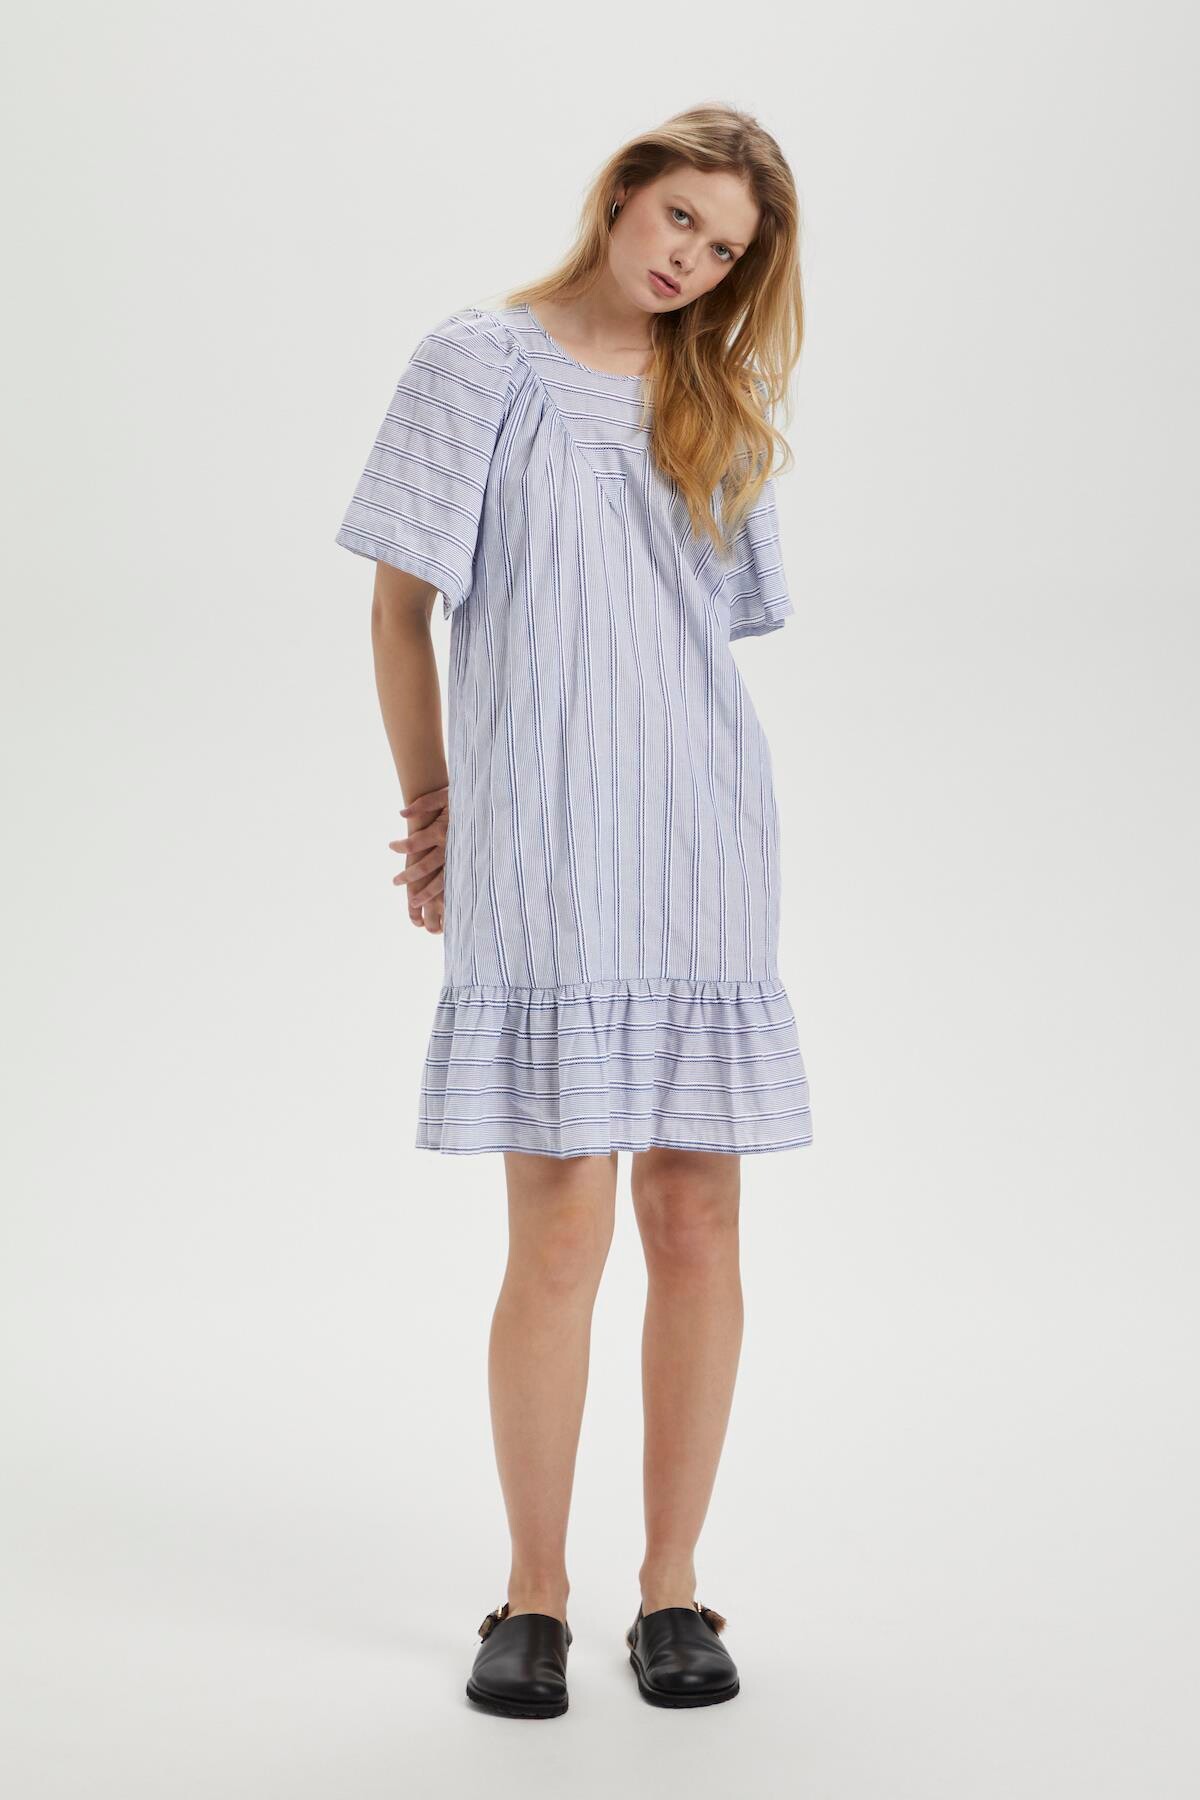 SOAKED IN LUXURY SLHANNIE DRESS 30405985 301238 (Blue and white stripes, XS)